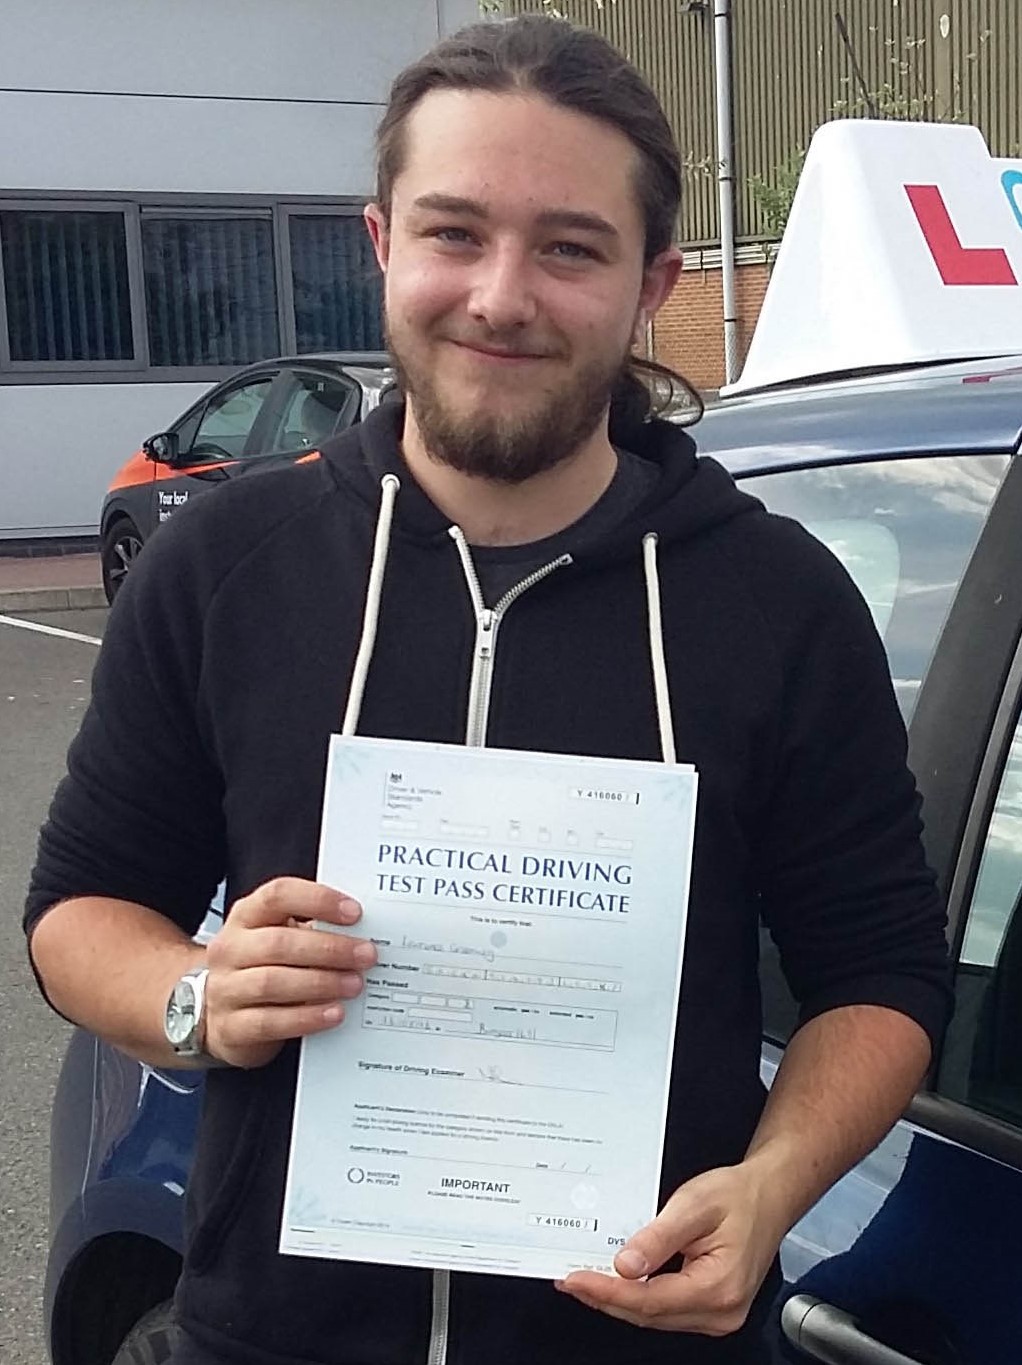 laurence_passed